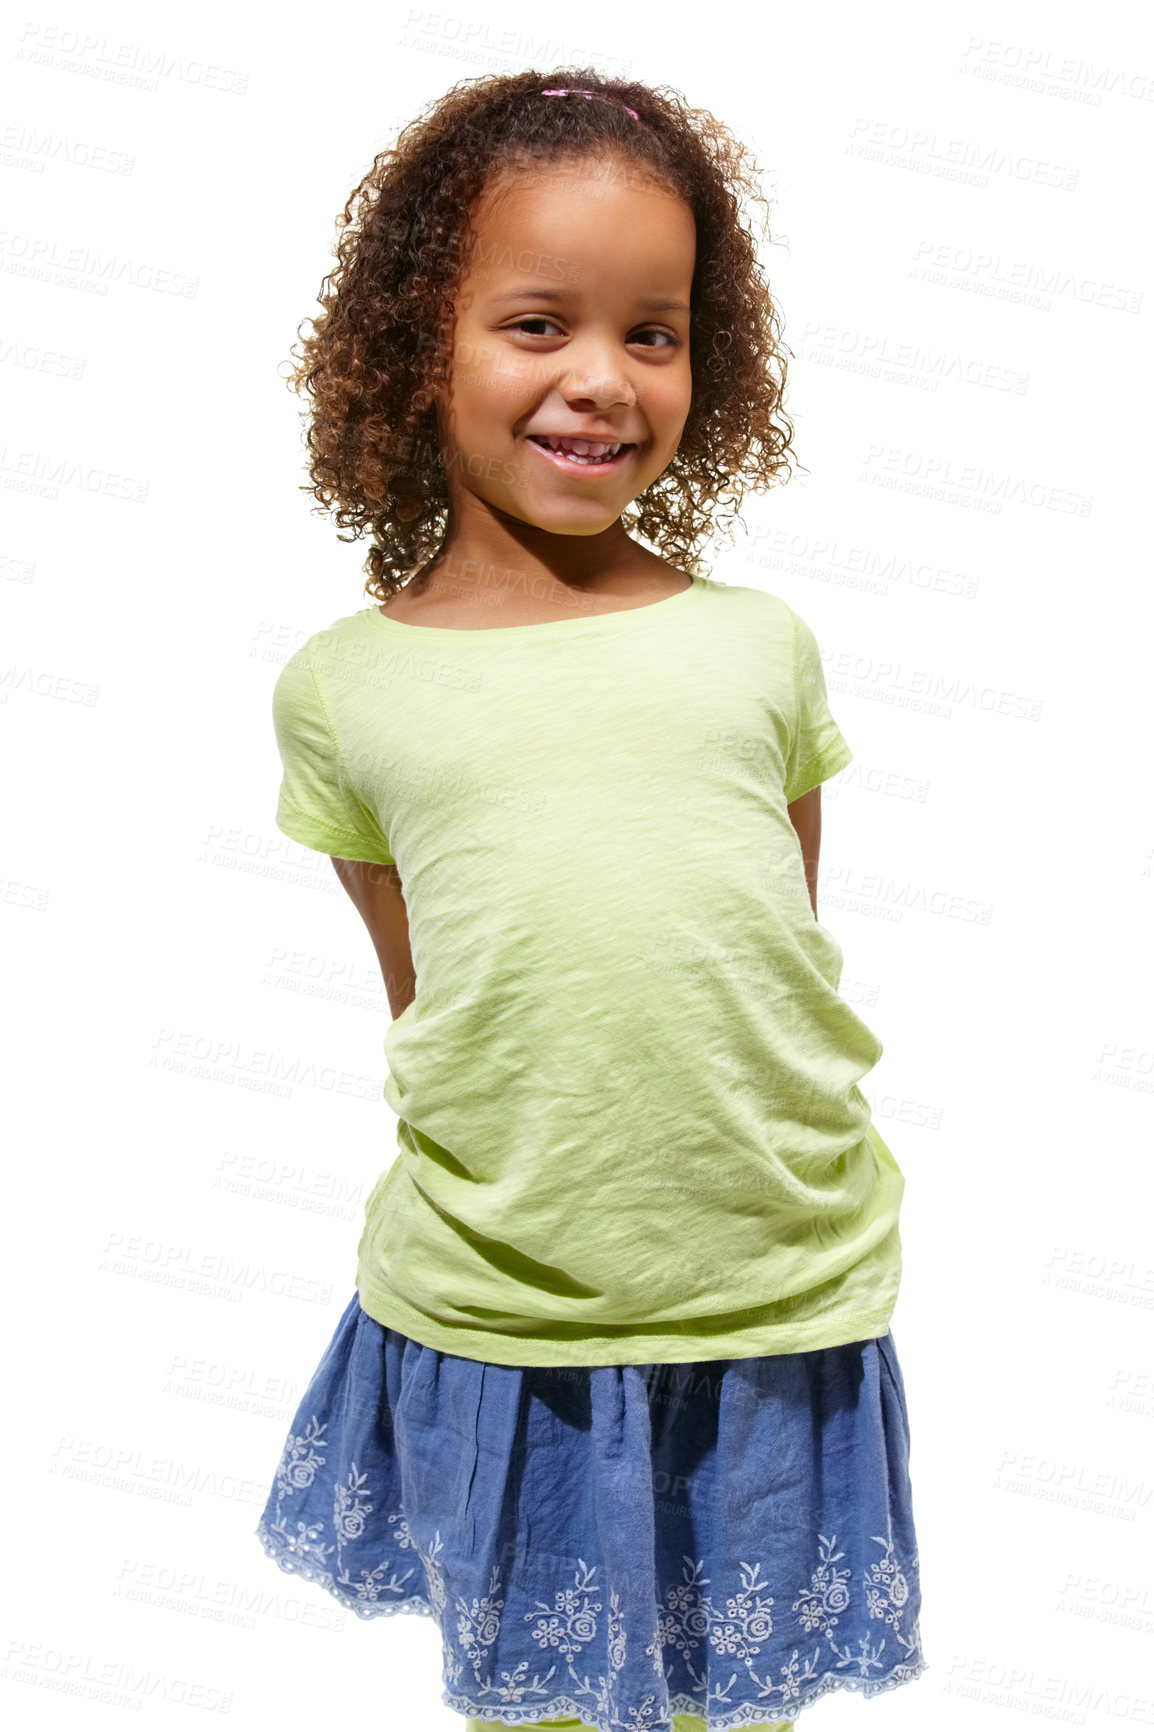 Buy stock photo Cute, African child and face of young girl in a studio with happiness and kids fashion. White background, portrait and smile of kid with youth and children style feeling confident from clothing